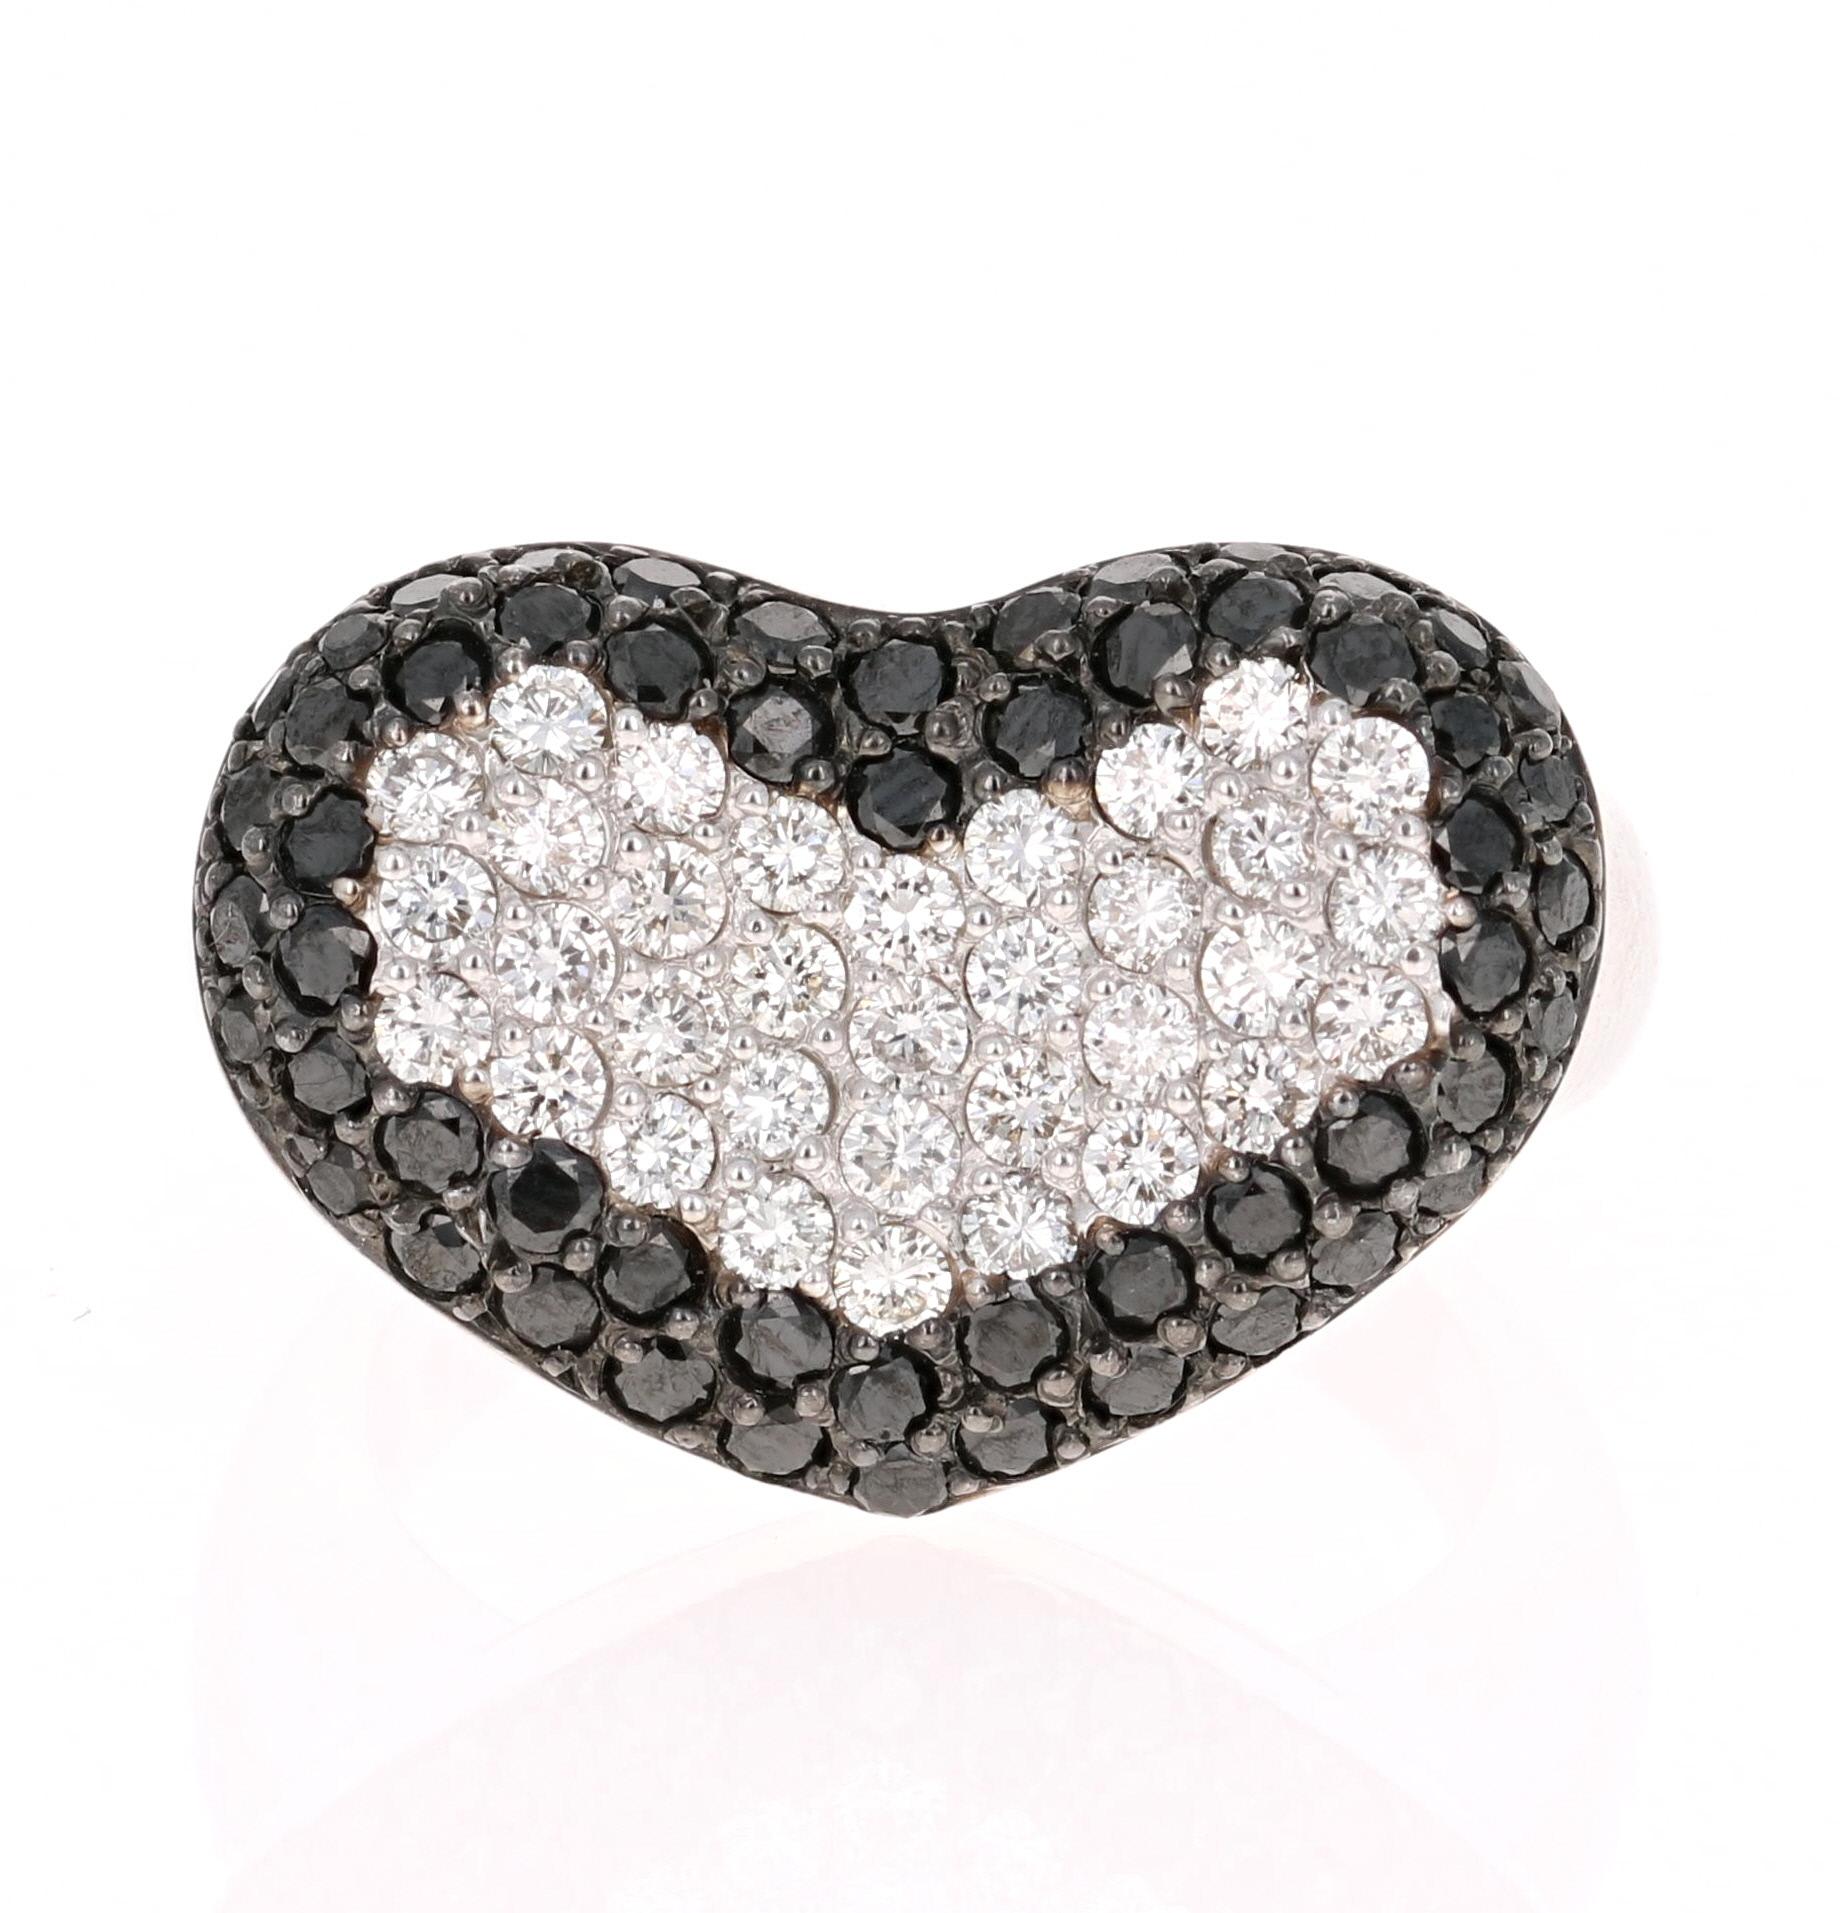 Delicate yet Bold Heart-Shaped Black and White Cocktail Diamond Ring

This gorgeous heart shaped ring has 60 Black Round Cut Diamonds weighing 1.21 Carats and 34 White Round Cut Diamonds weighing 0.70 Carats. The total carat weight of the ring is